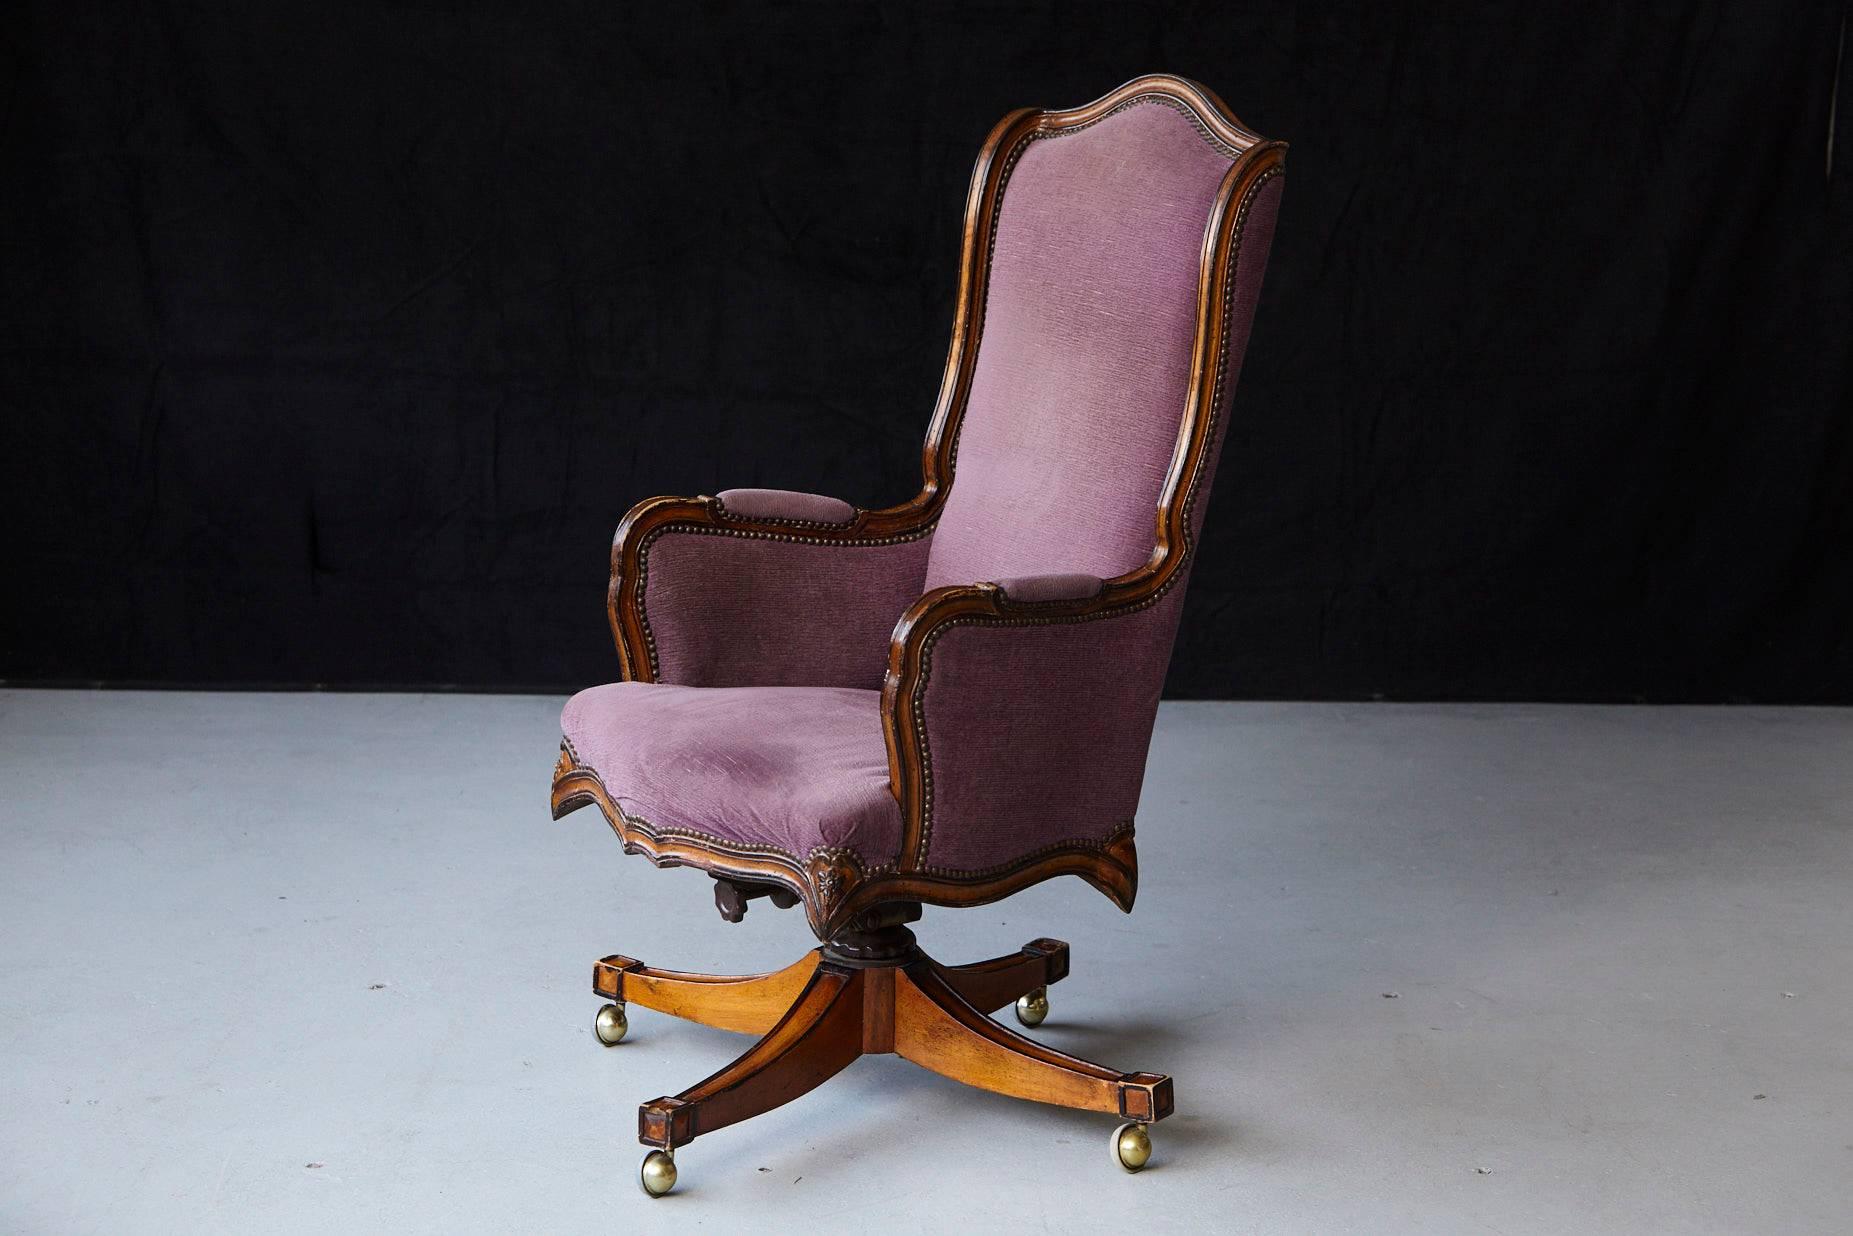 High quality early 1970s reproduction high back walnut 'banker's' chair on pastored swivel base and covered in nail trimmed violet striae velvet.
There is one piece of wood missing in the lower part of the swivel base between two legs of the chair,